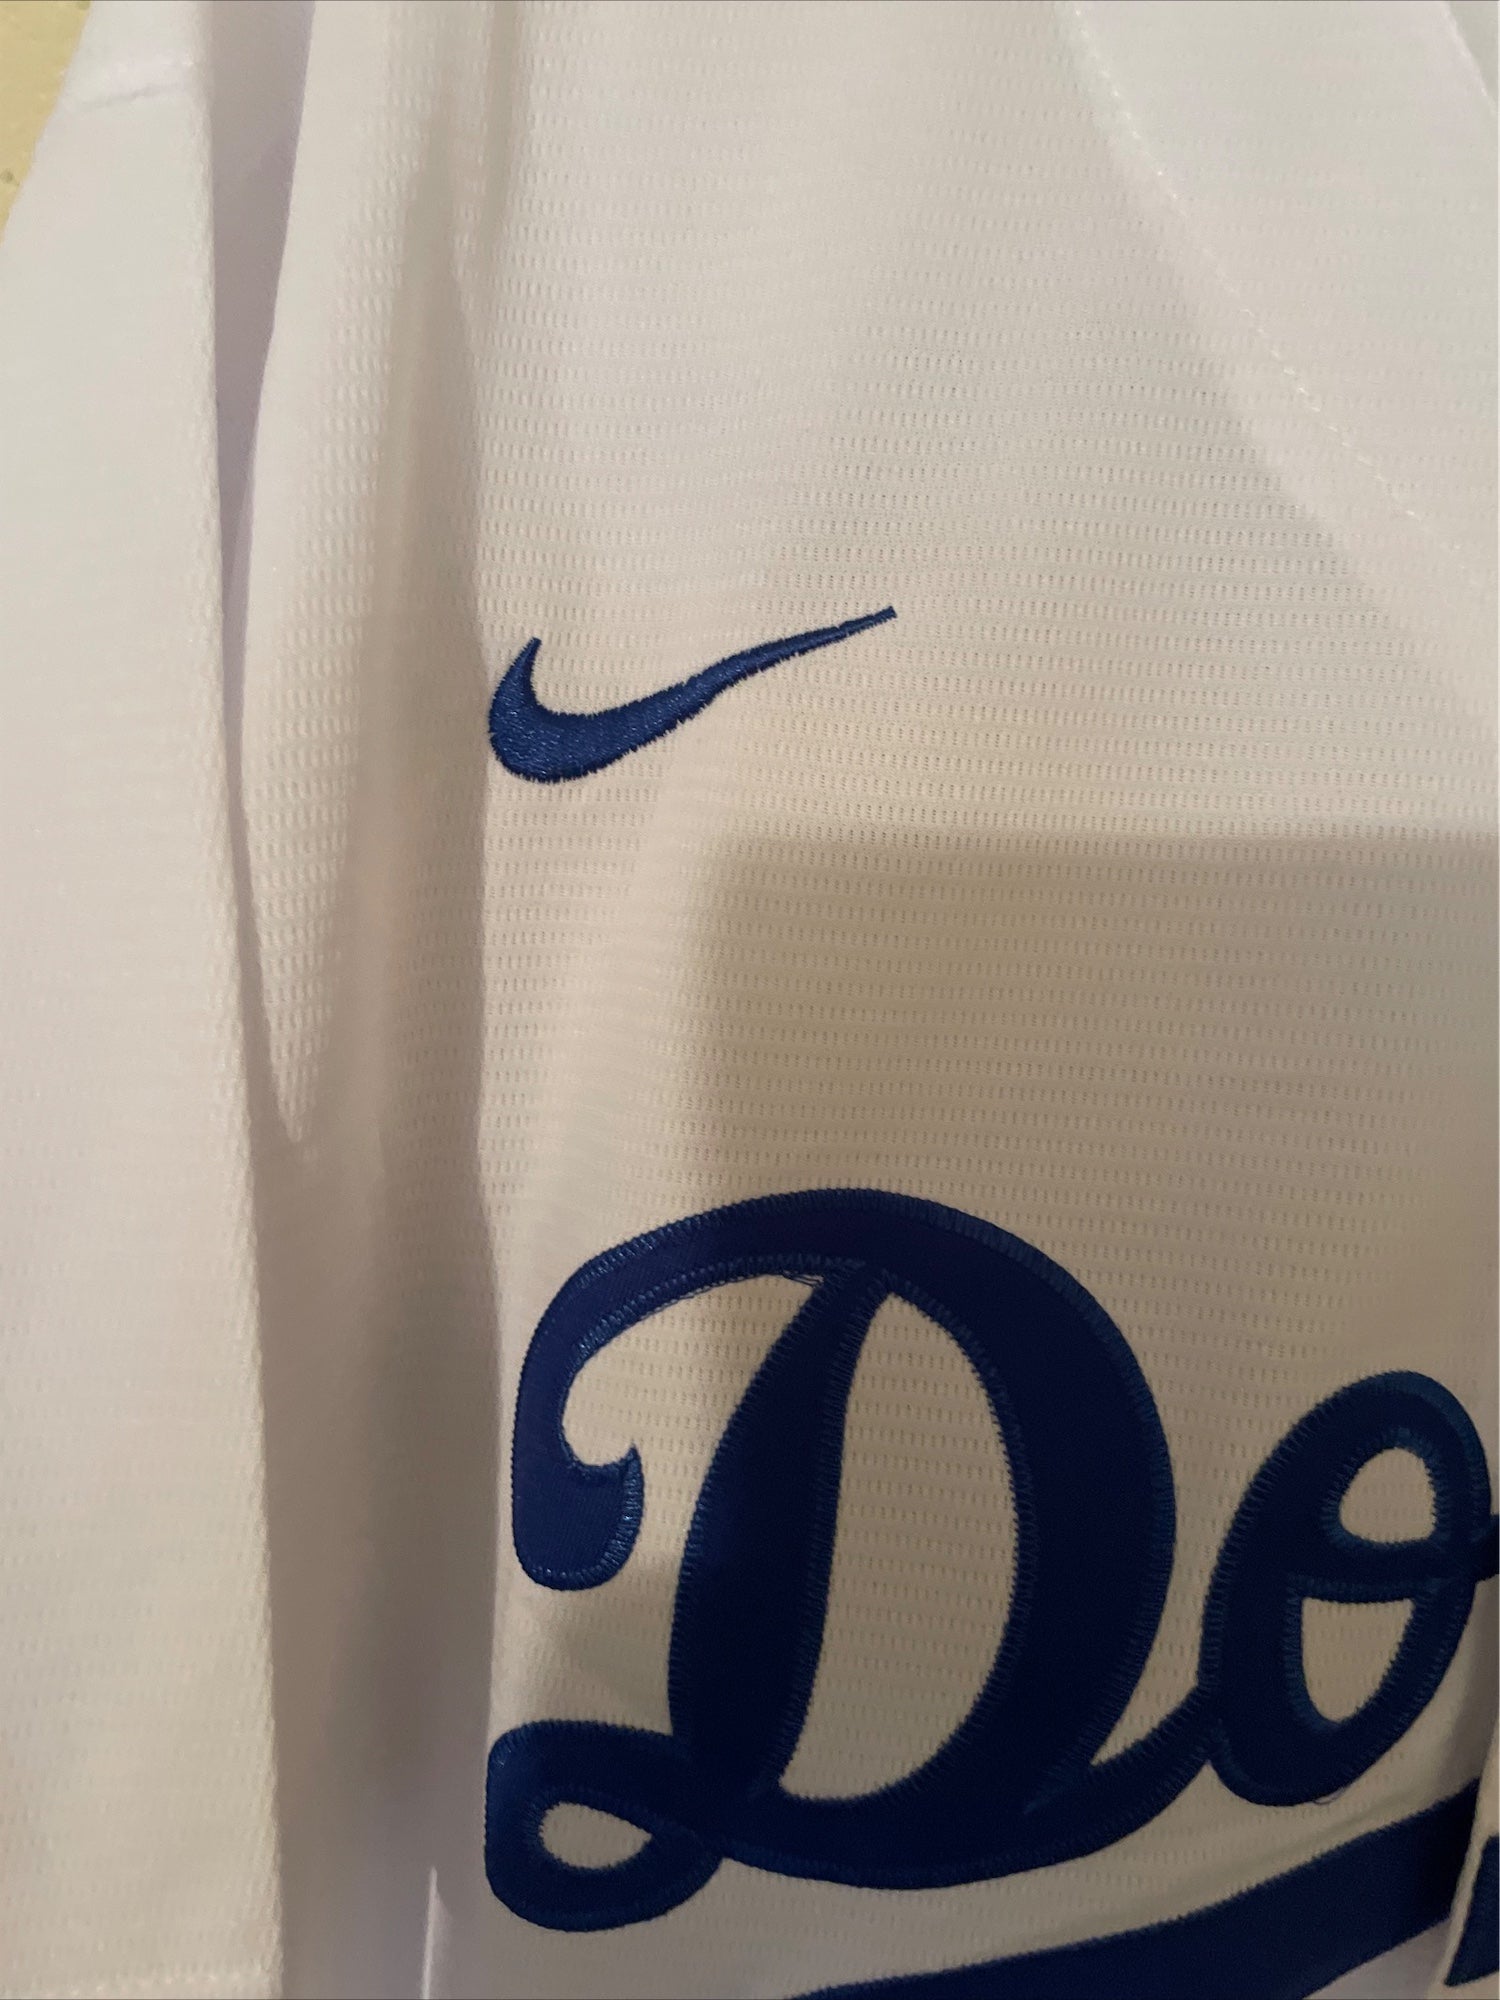 Los Angeles Dodgers Clayton Kershaw Jersey with tags - Size Men's XL